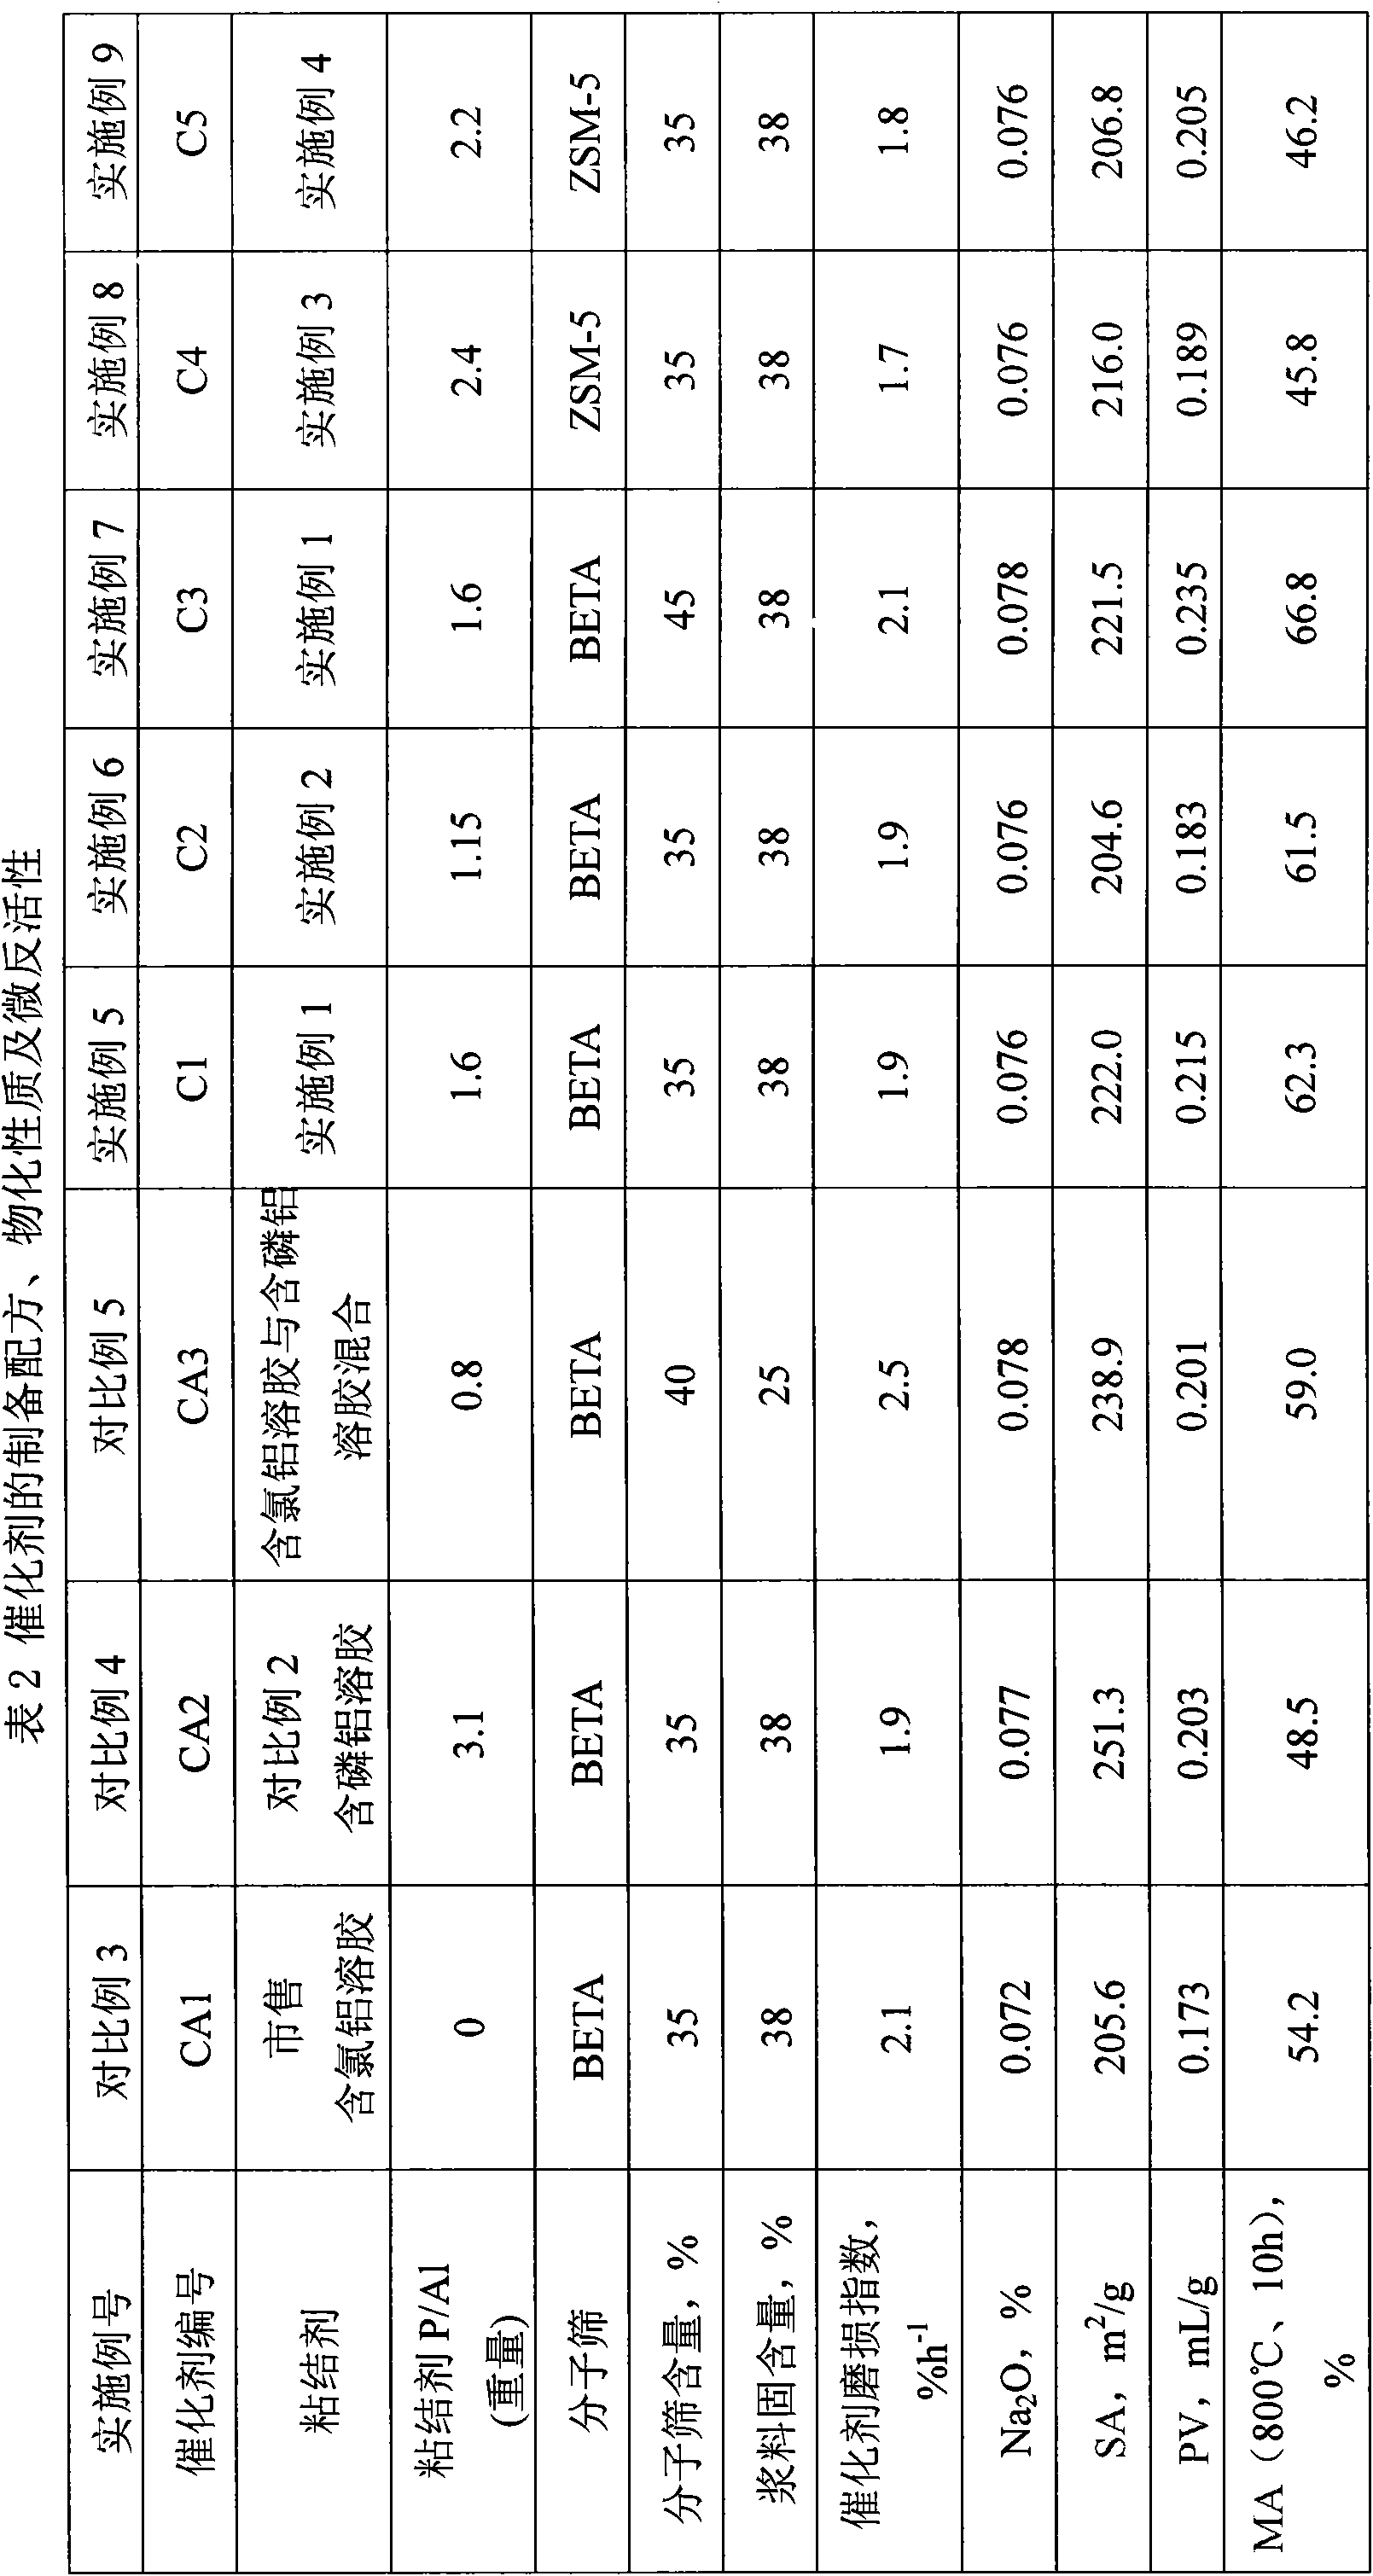 Aluminium phosphate sol used for catalyst and preparation method thereof